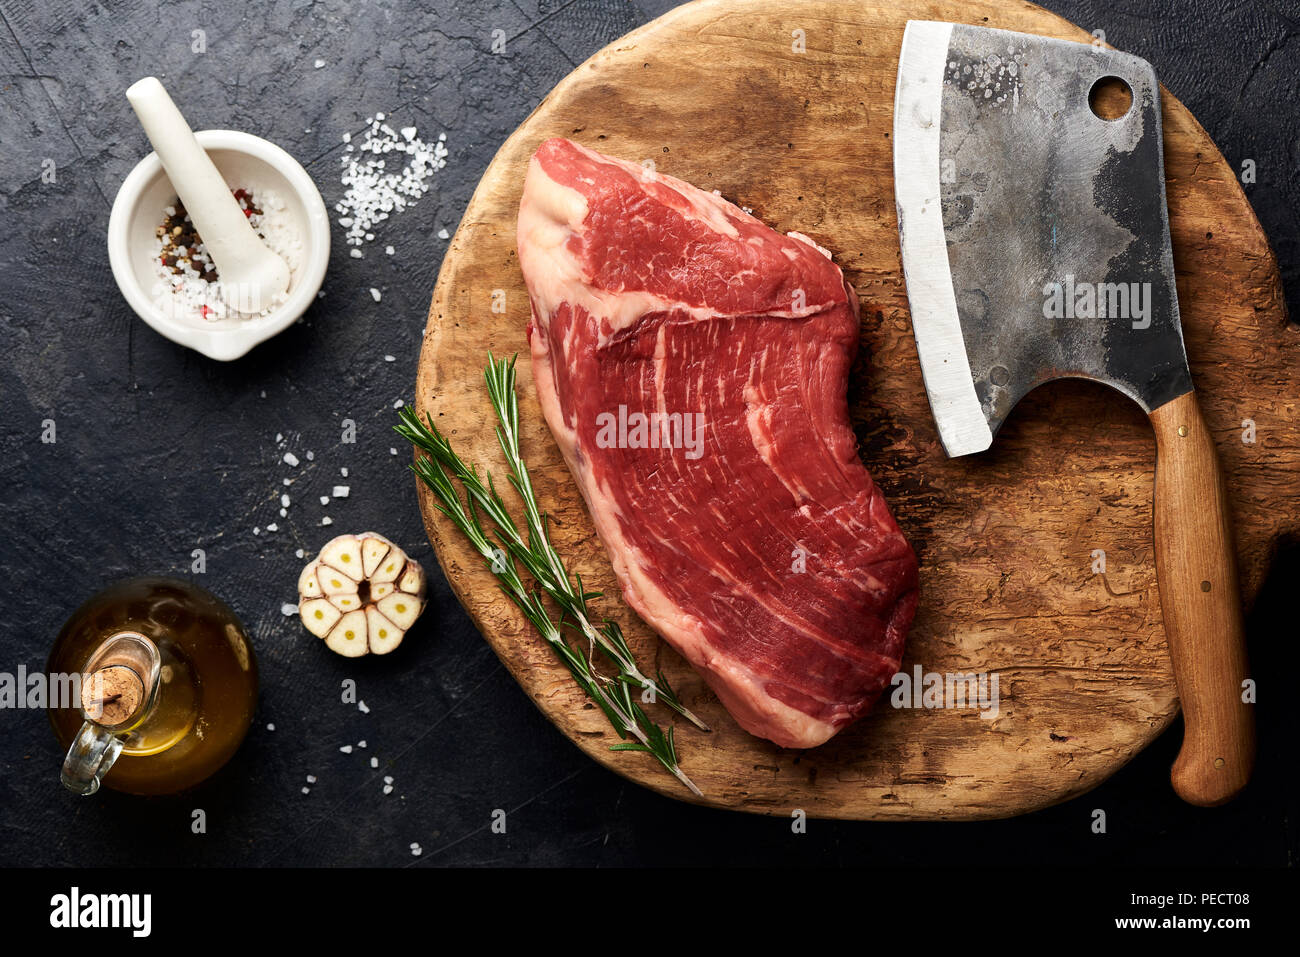 Raw fresh marbled meat Black Angus steak and meat cleaver on wooden board. Meat on black background with rosemary, spices, olive oil and garlic. Top view. Stock Photo